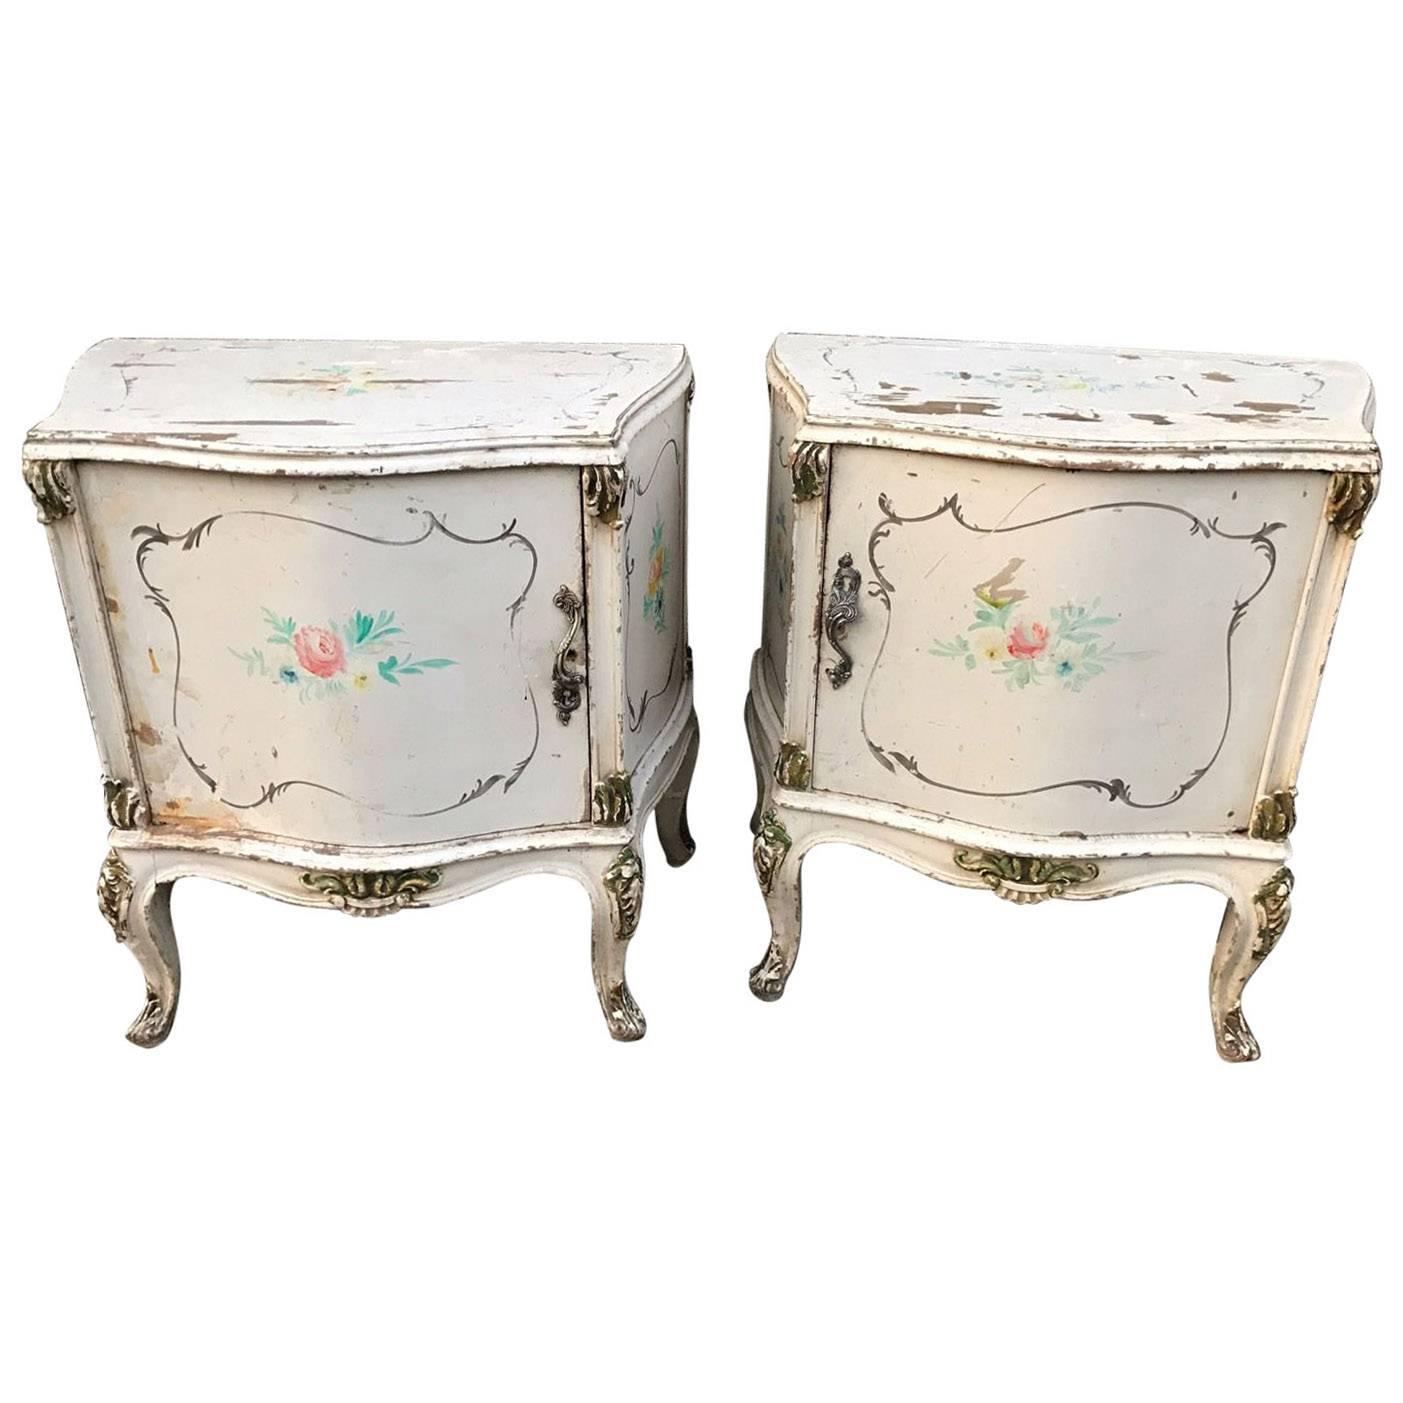 Pair of French, Antique, Vintage, Shabby Bedside Tables